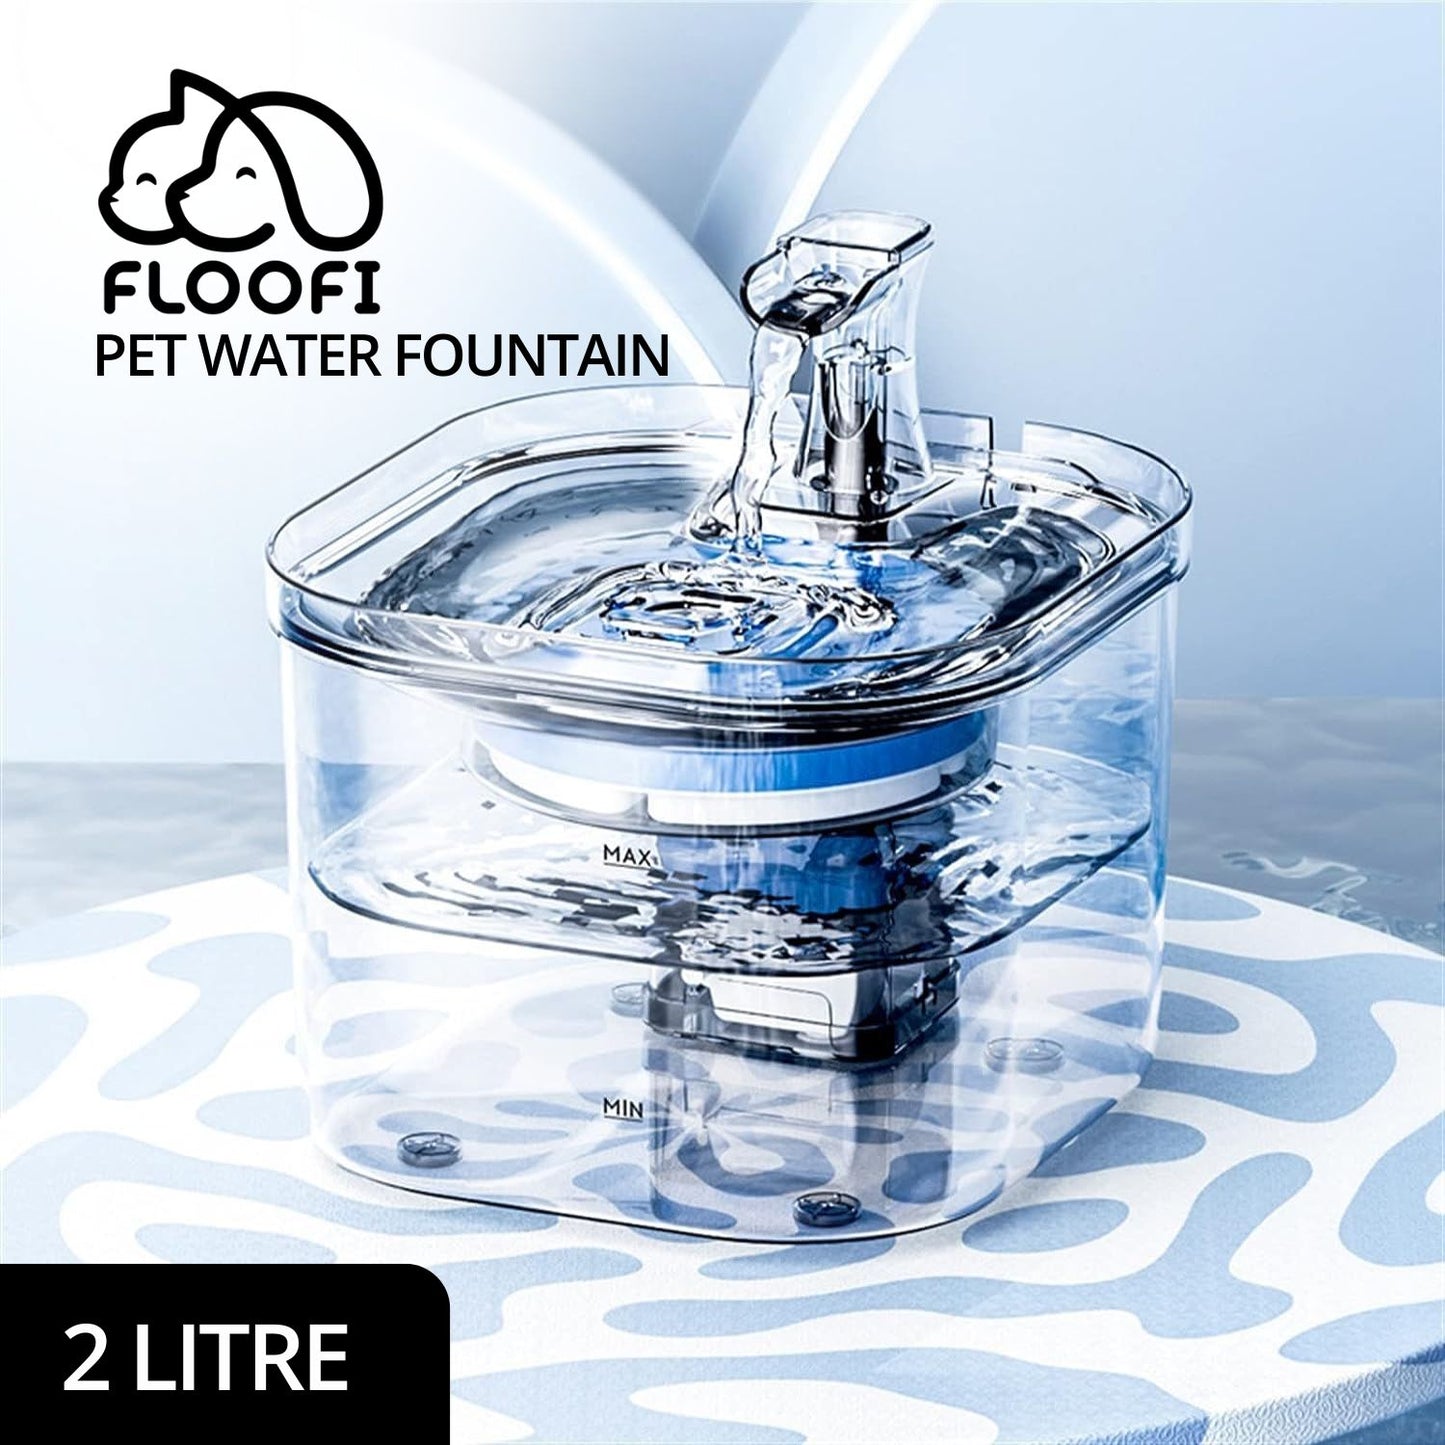 FLOOFI 2 Litre Pet Water Fountain for Cats and Small Dogs